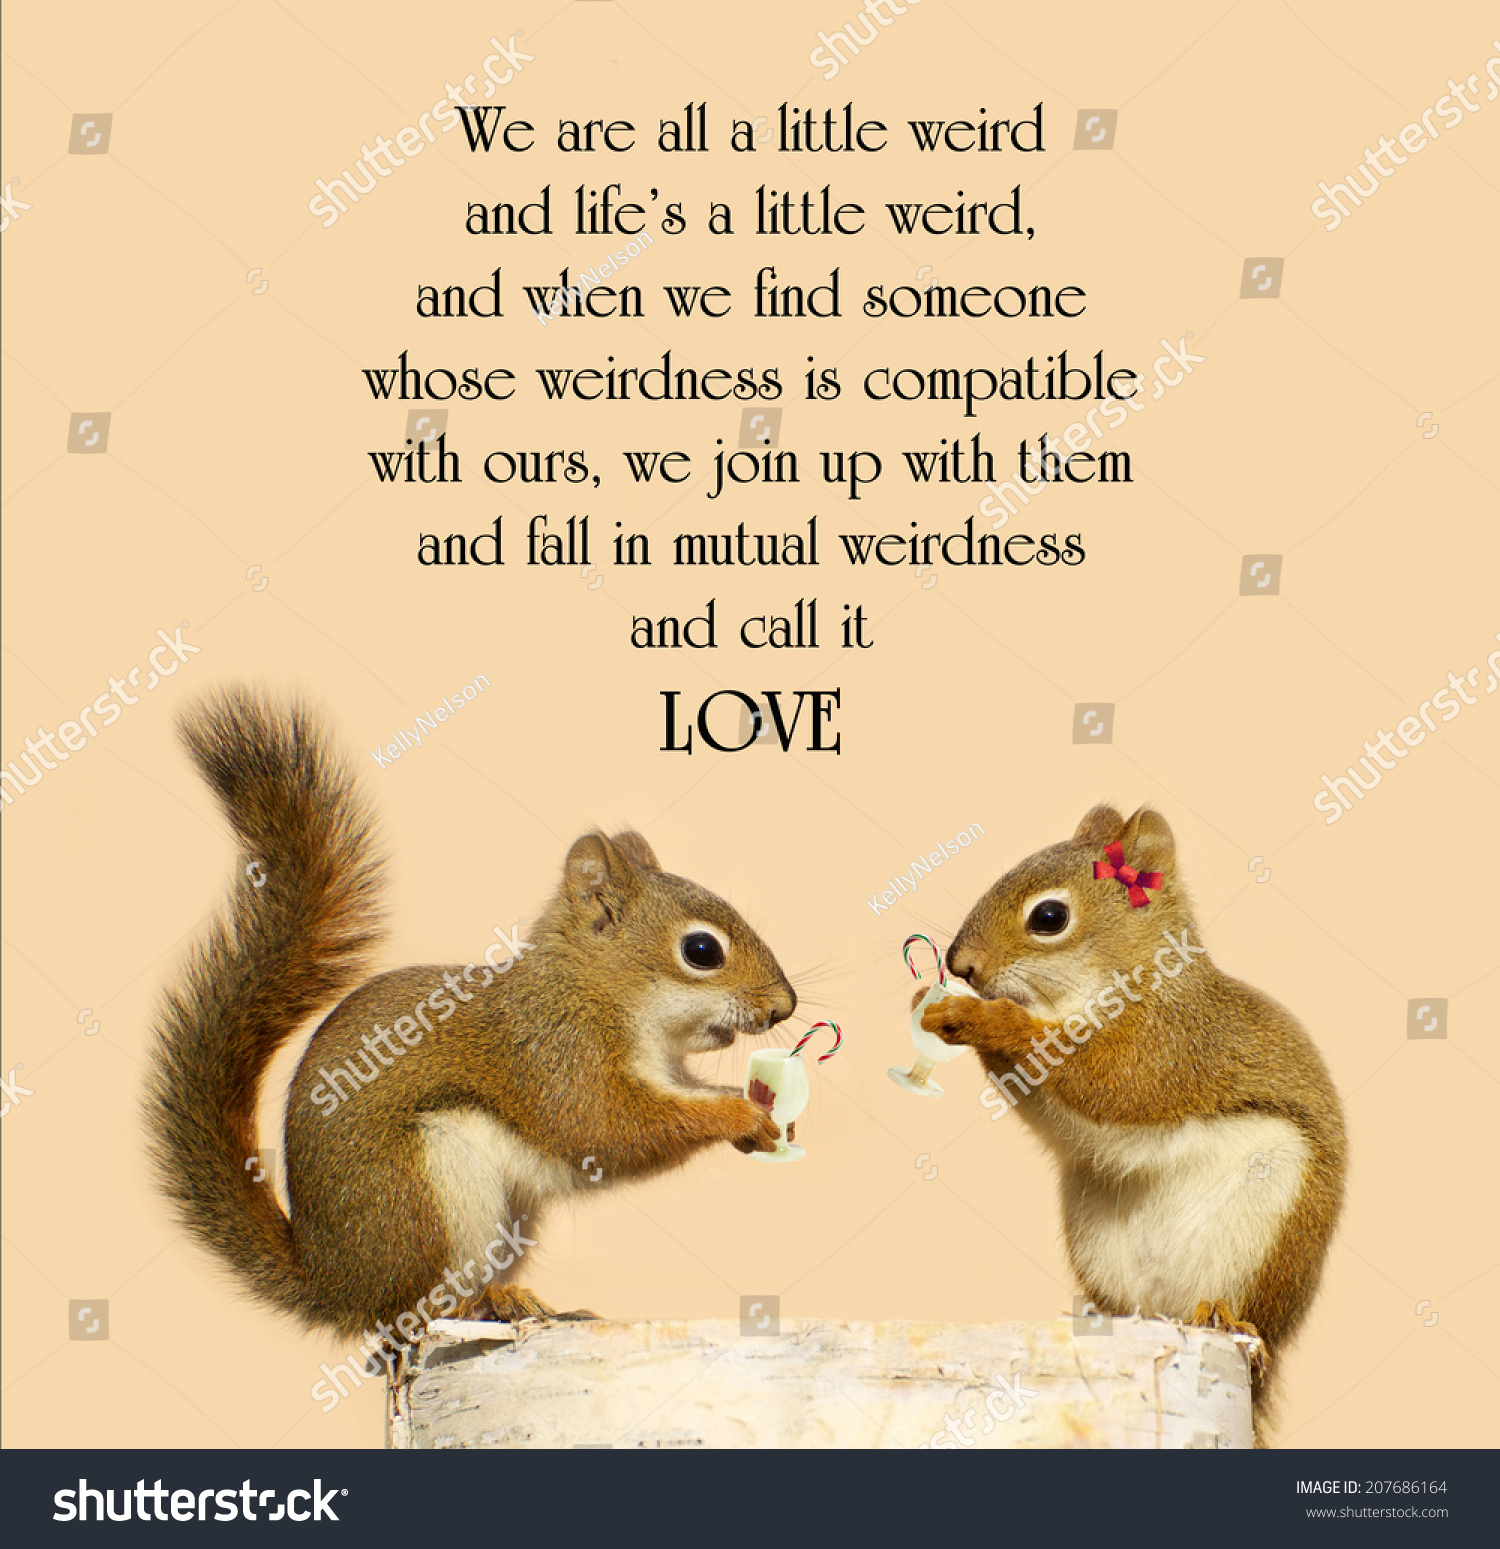 Inspirational quote on love by Dr Suess with a cute pair of squirrels in love